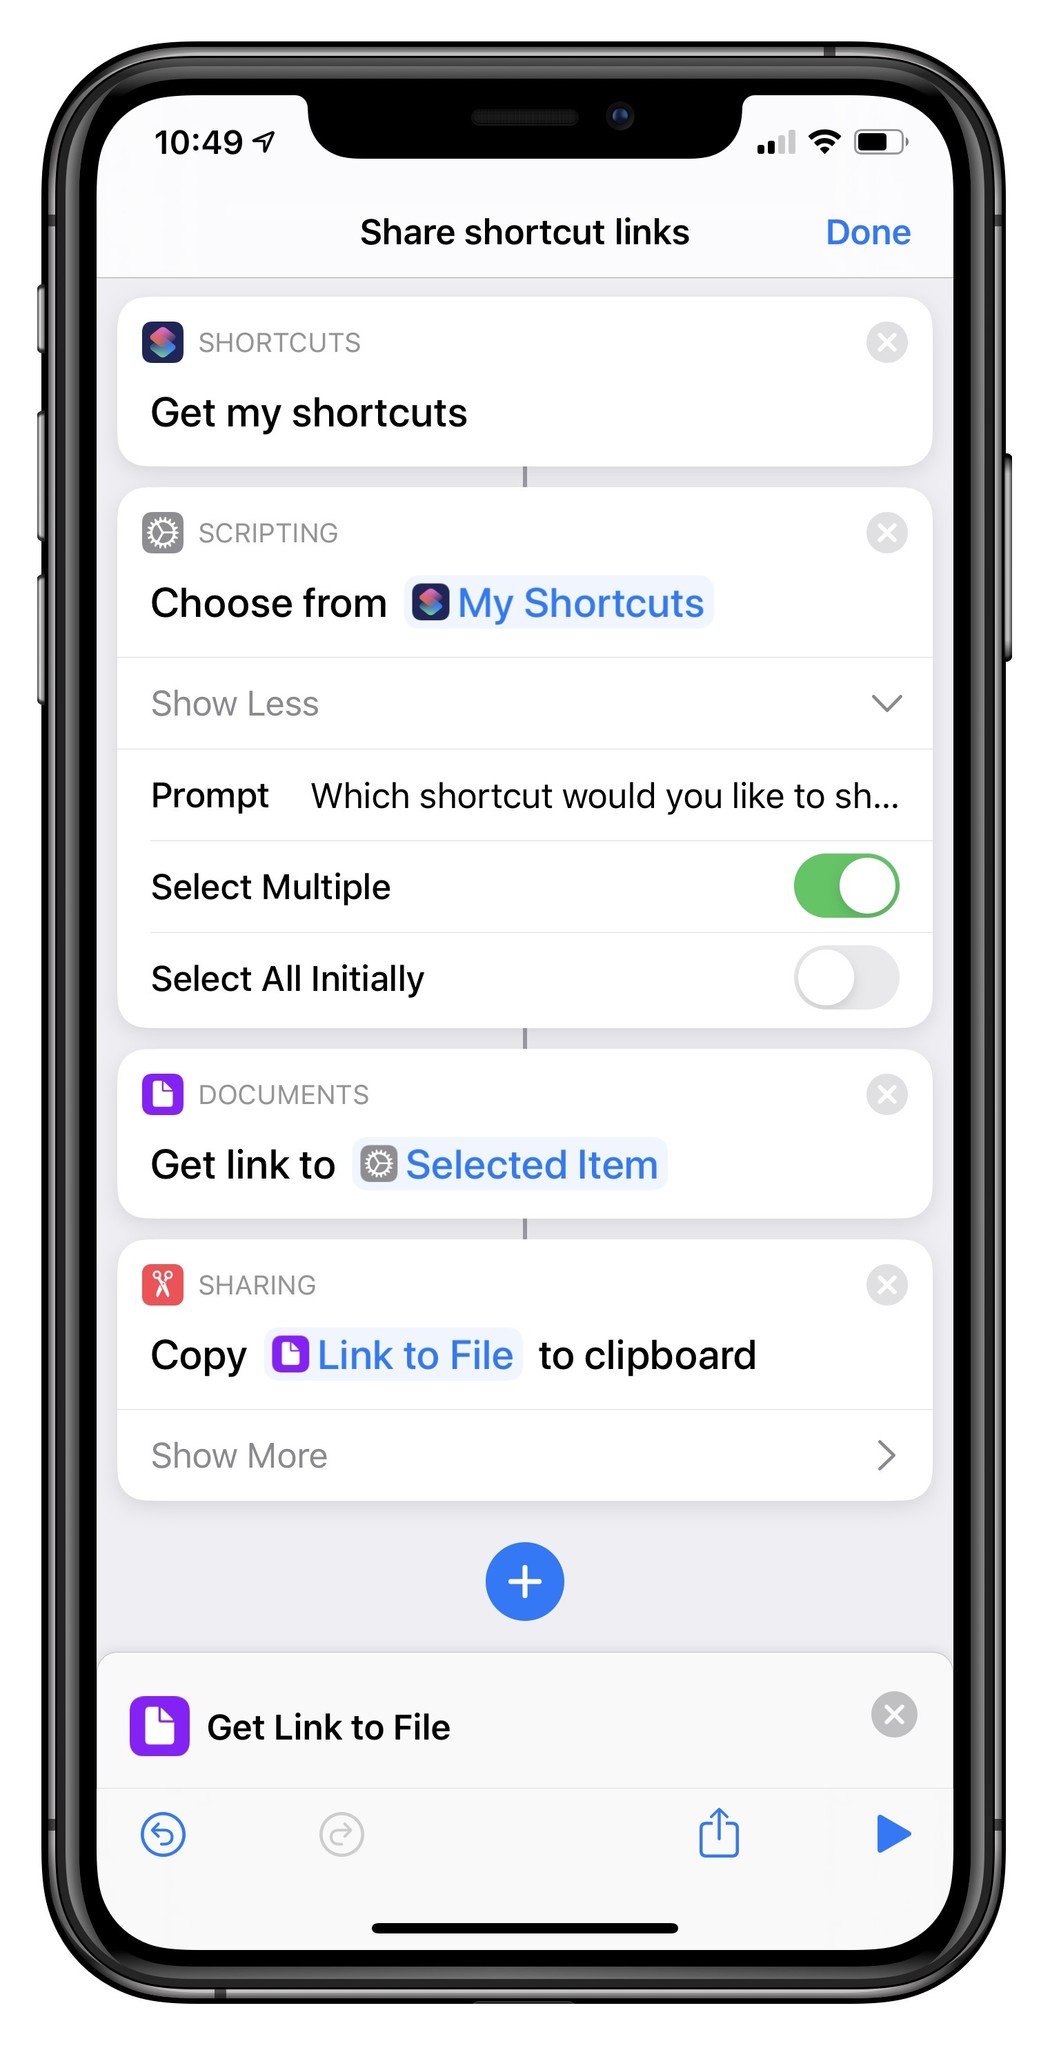 Screenshot showing example shortcut on iPhone using Get My Shortcuts, Choose From List, Get Link to File, and Copy to Clipboard actions.